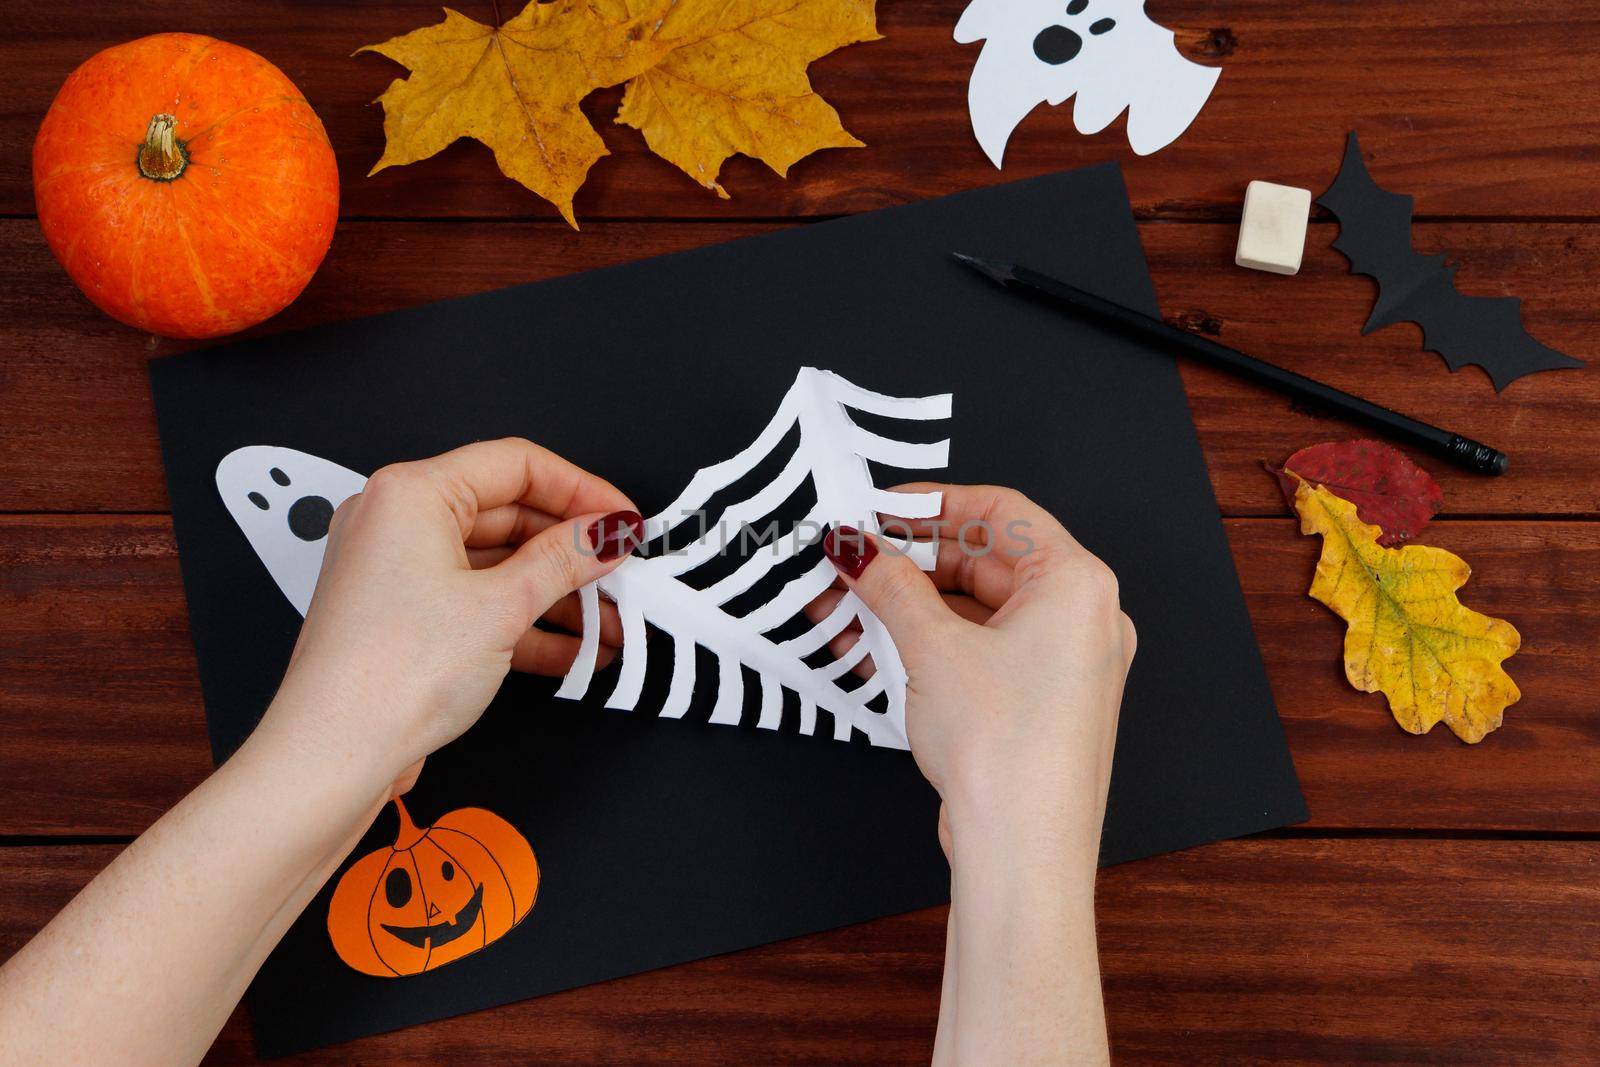 Halloween DIY. Step-by-step instructions for cutting a spider web from paper for the holiday. by Statuska